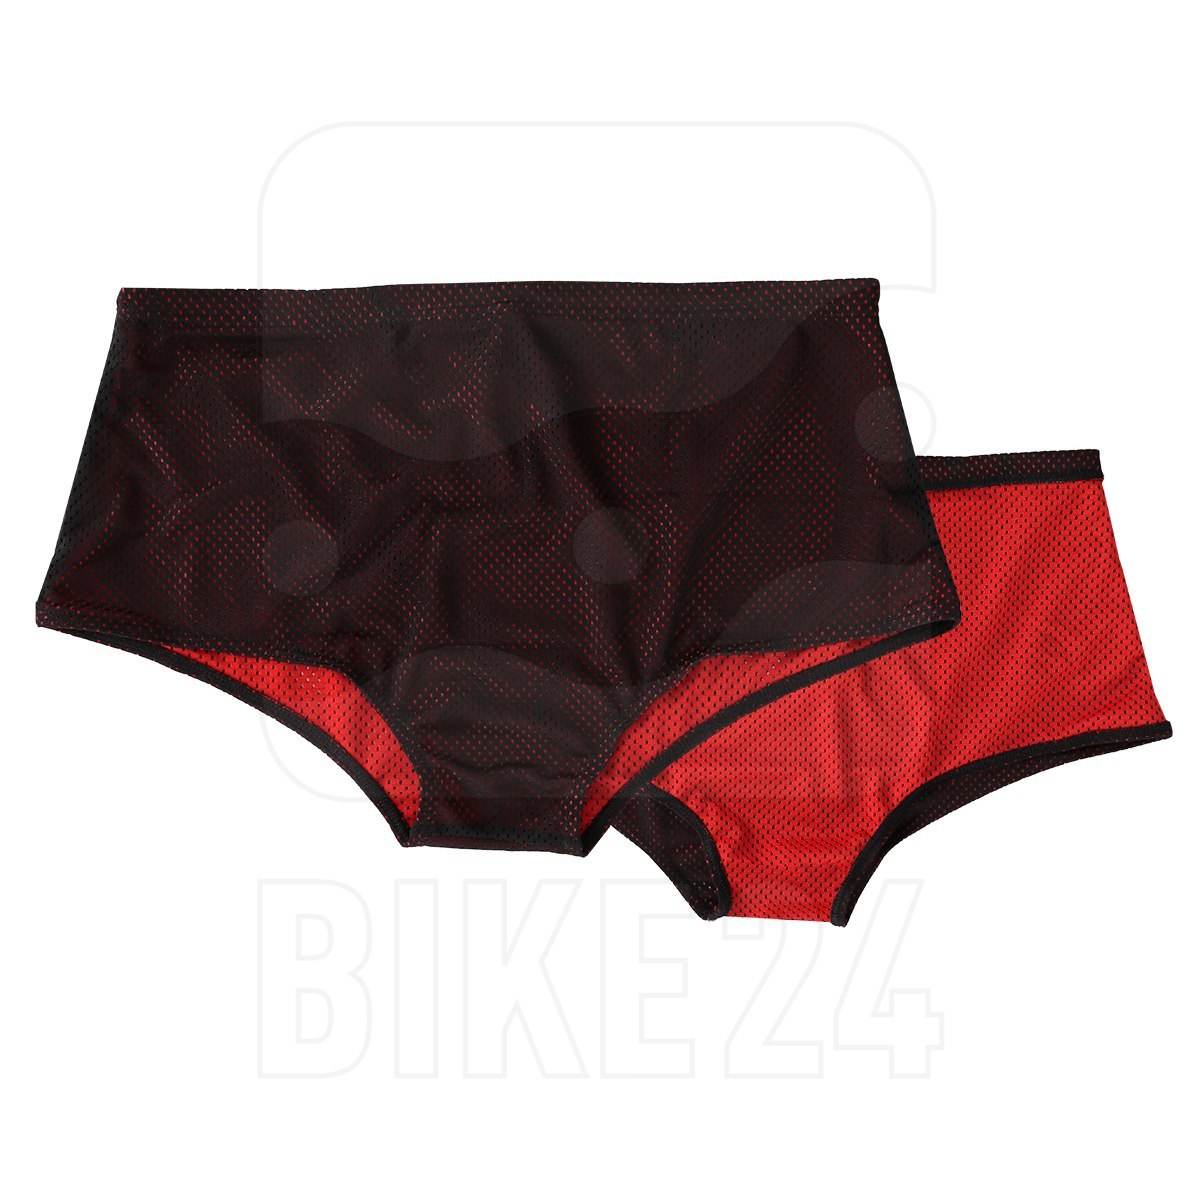 Picture of FINIS, Inc. Reversible Drag Suit - black/red